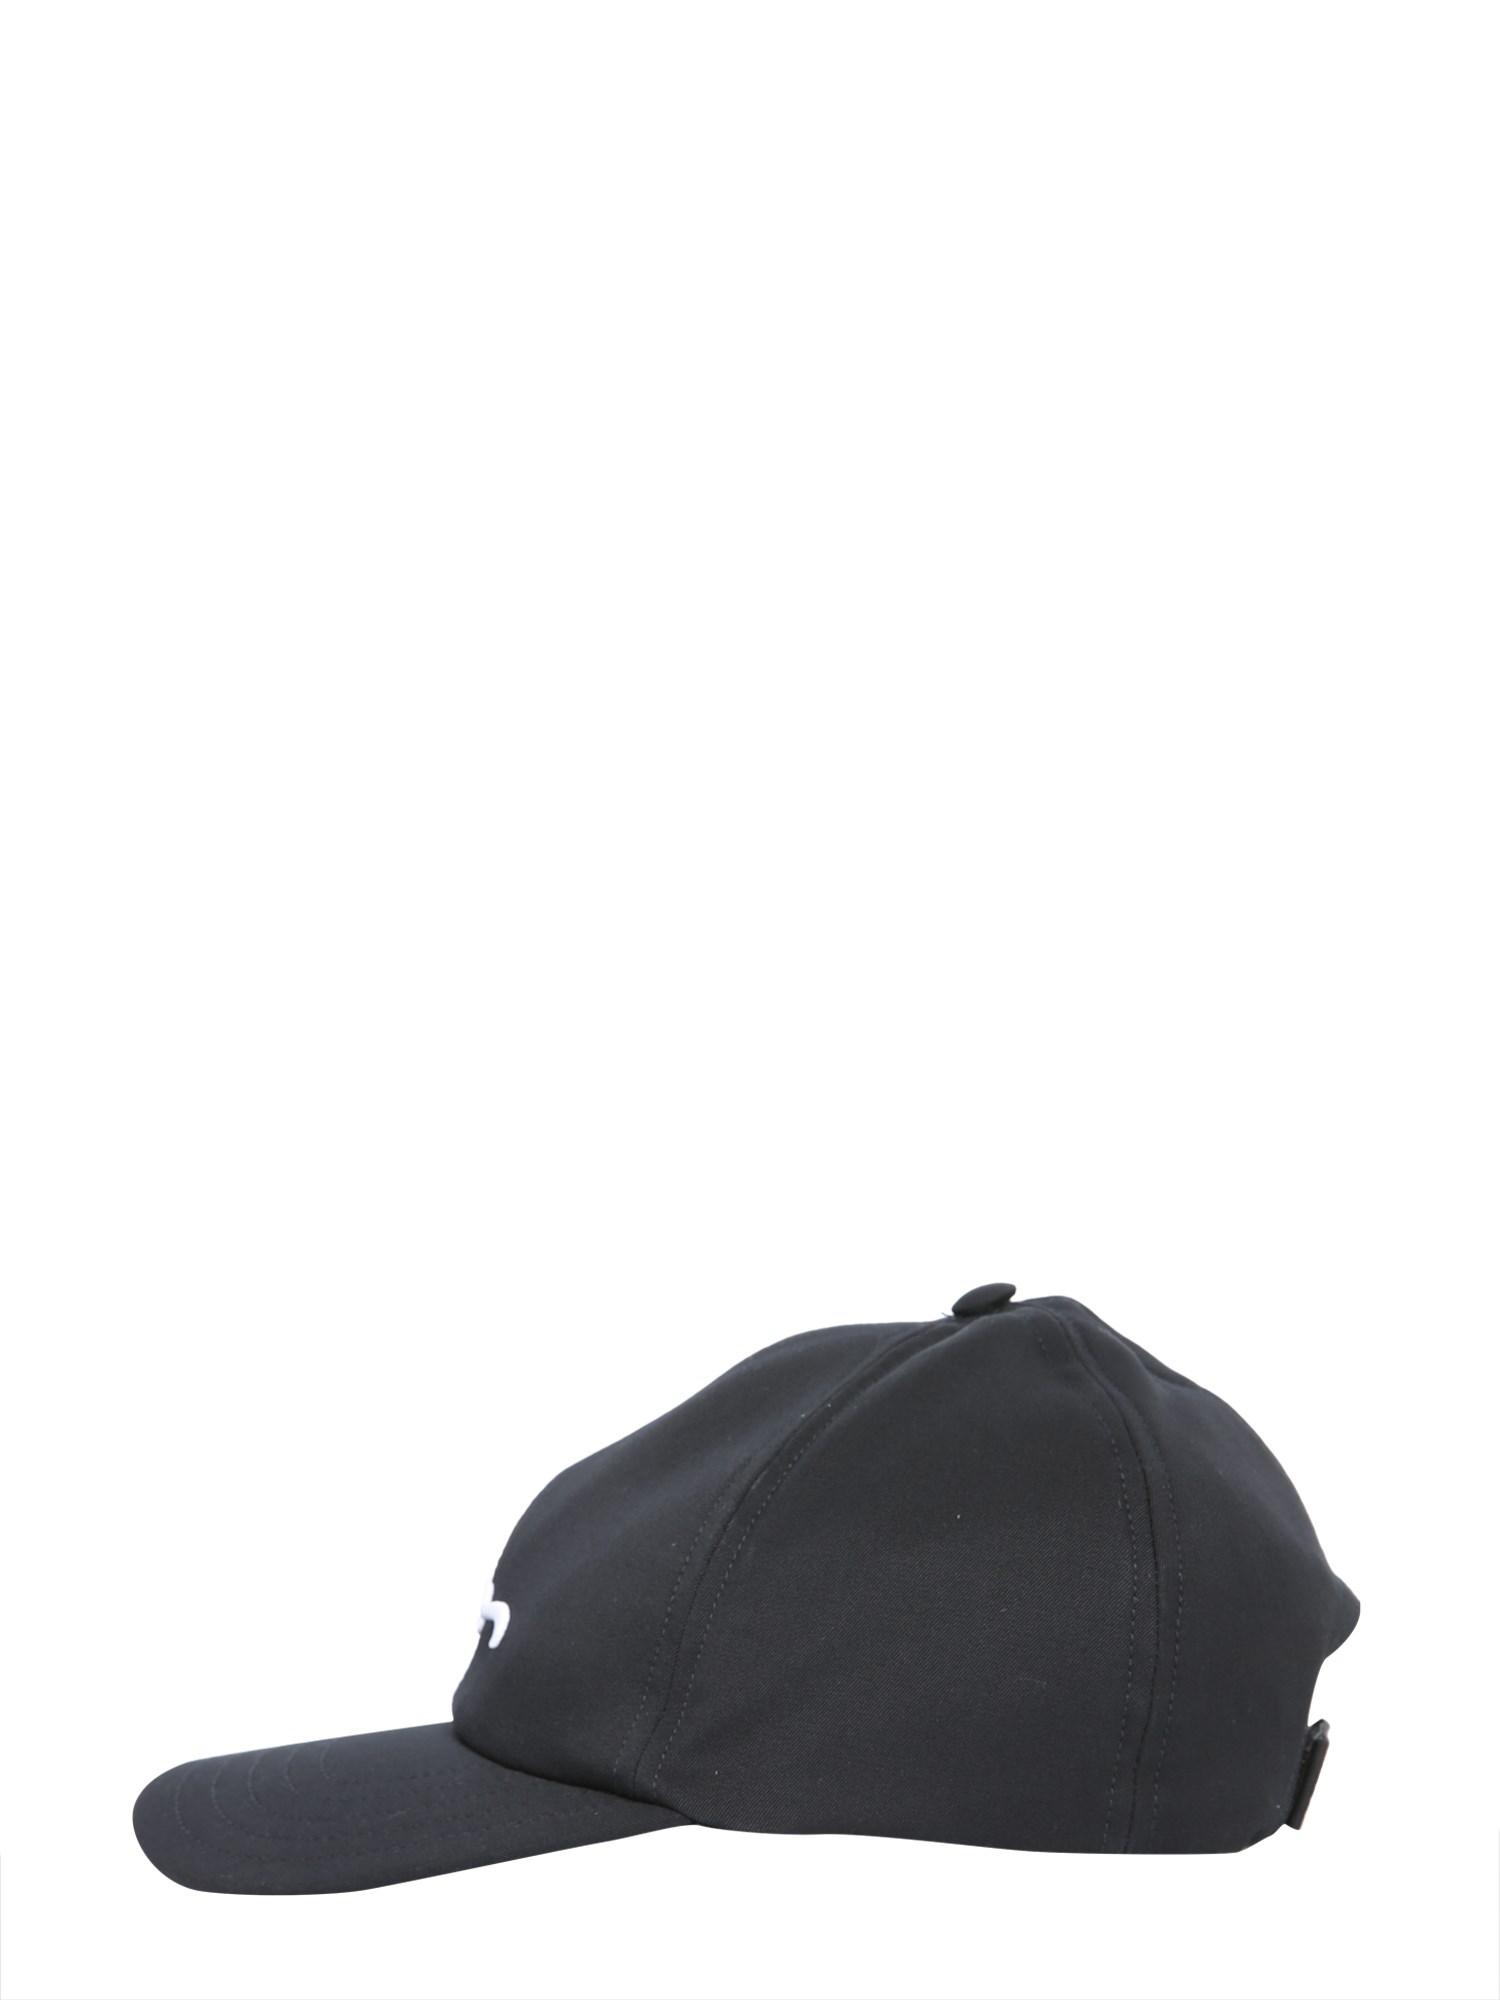 Dior Homme Black Logo-embroidered Wool Cap for Men - Lyst